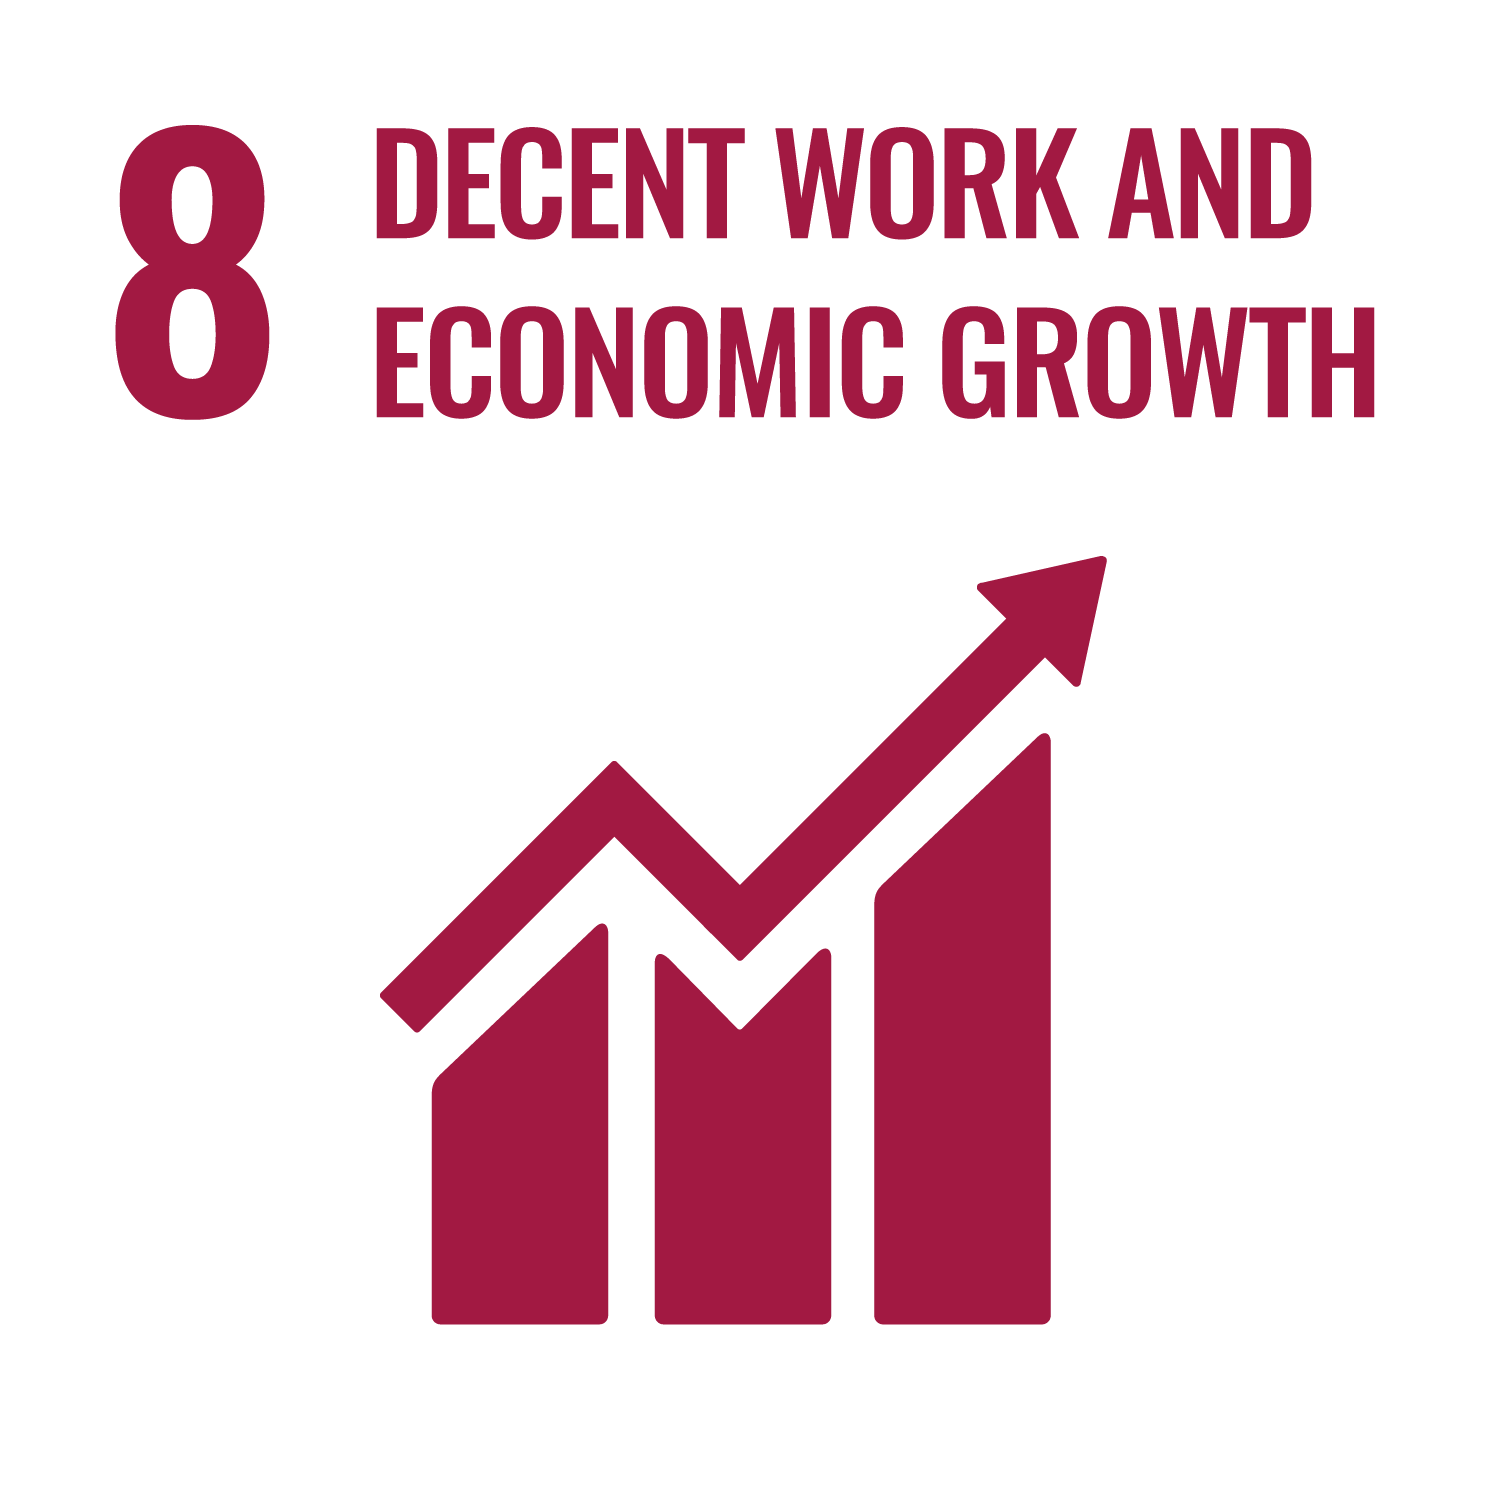 Decent work and economic growth